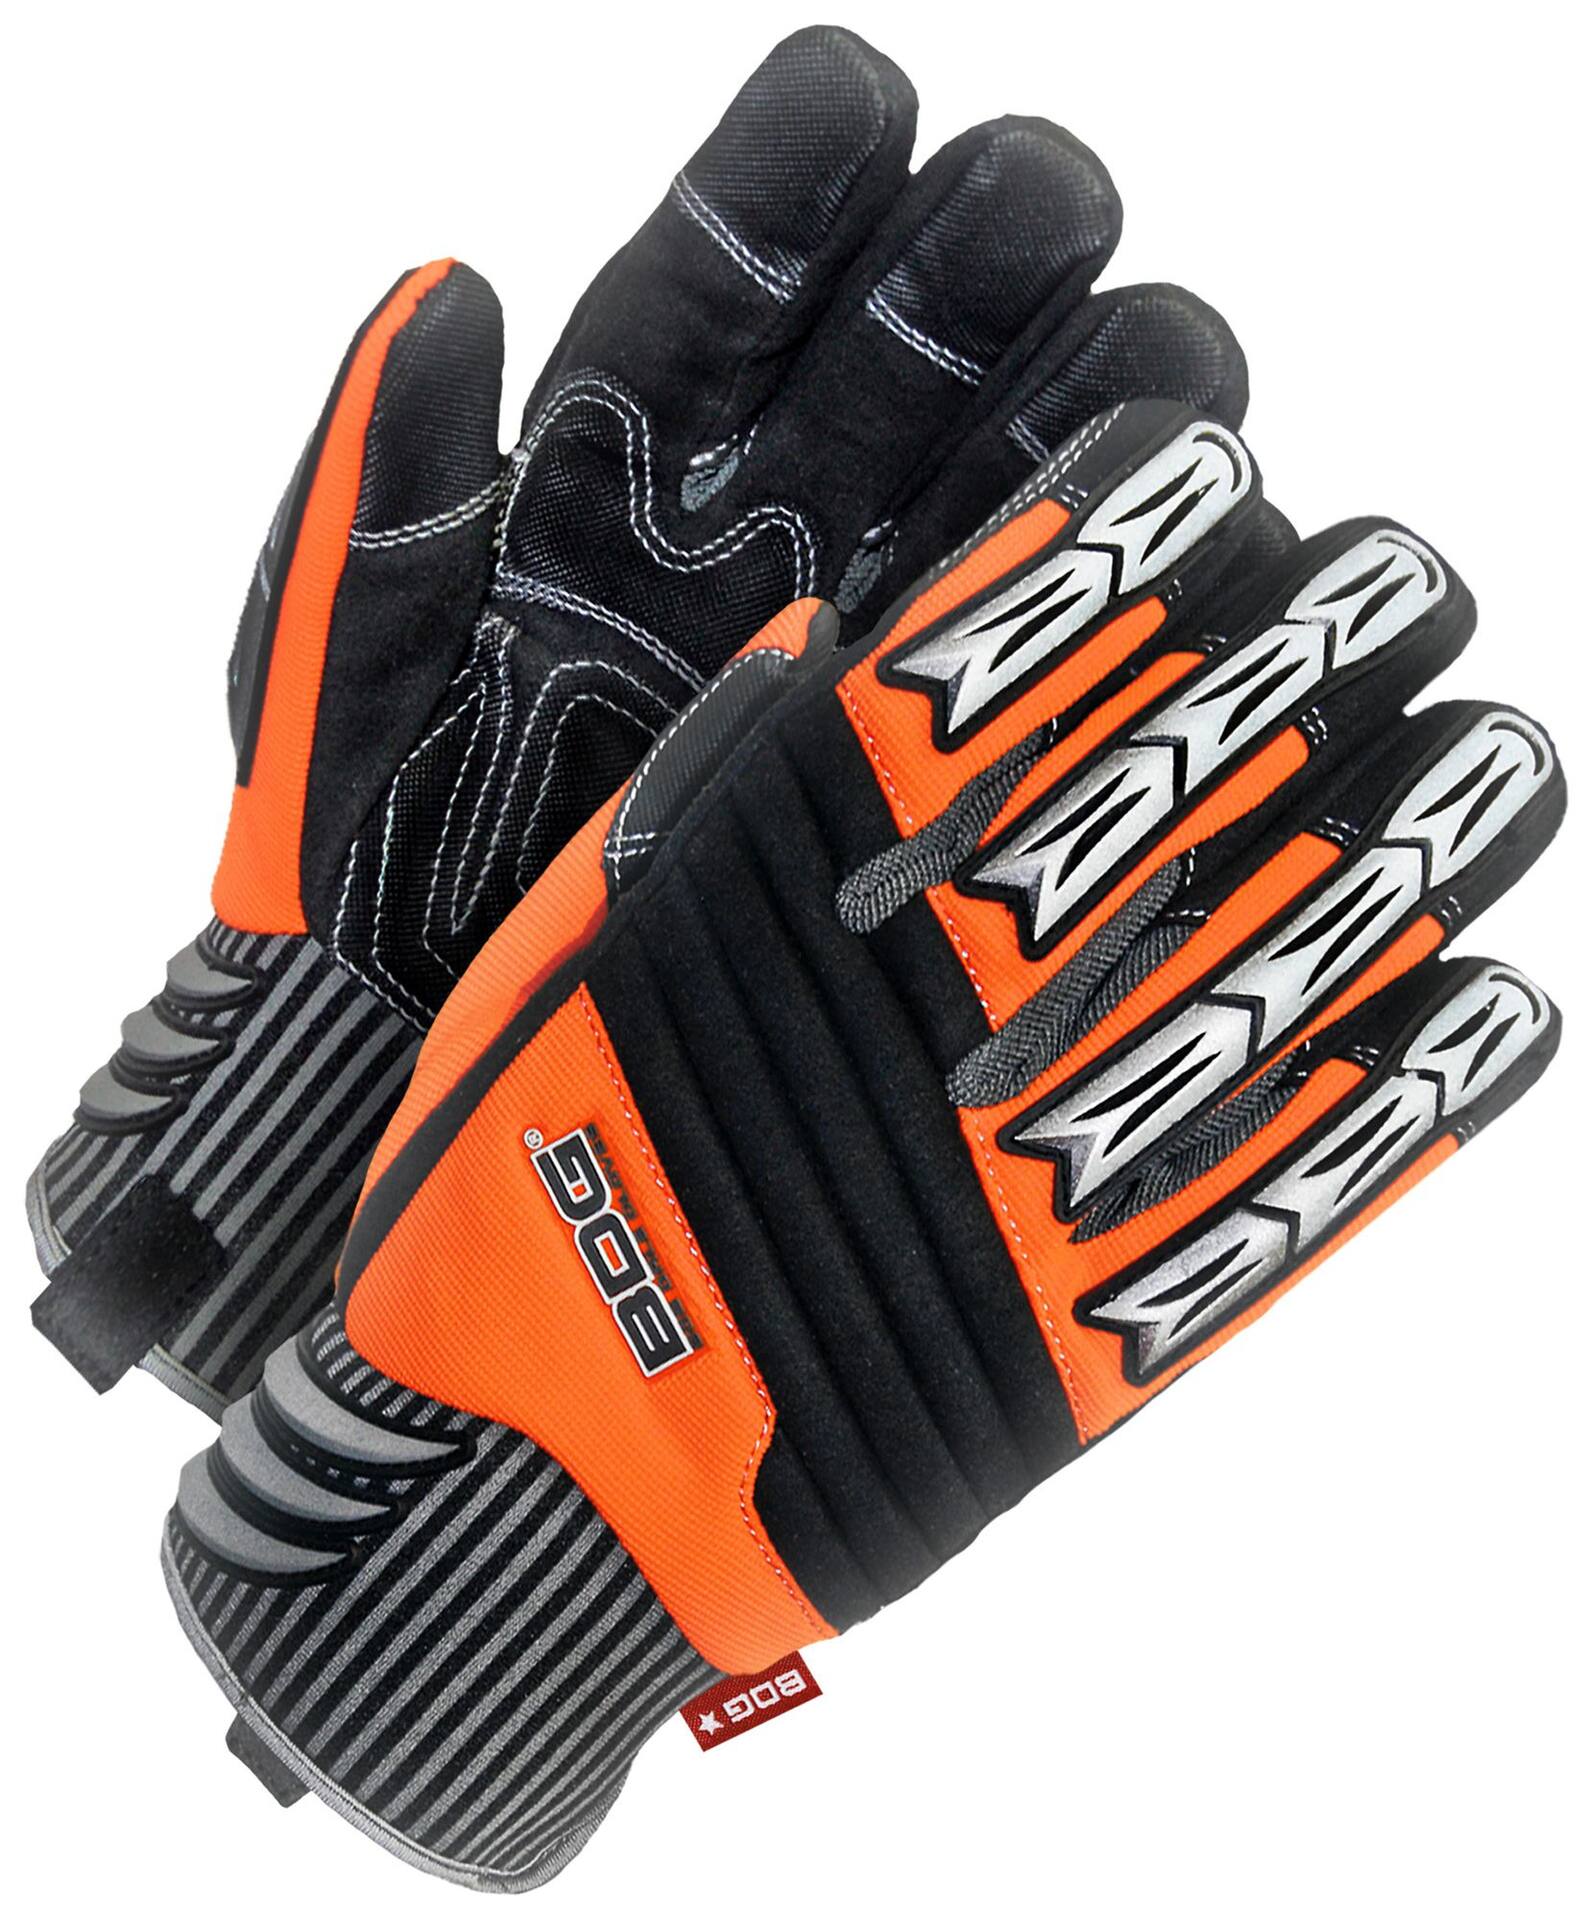 Forcefield Super Grip Unisex Adult Work Gloves, Oil & Water-Resistant,2-pk,  Large